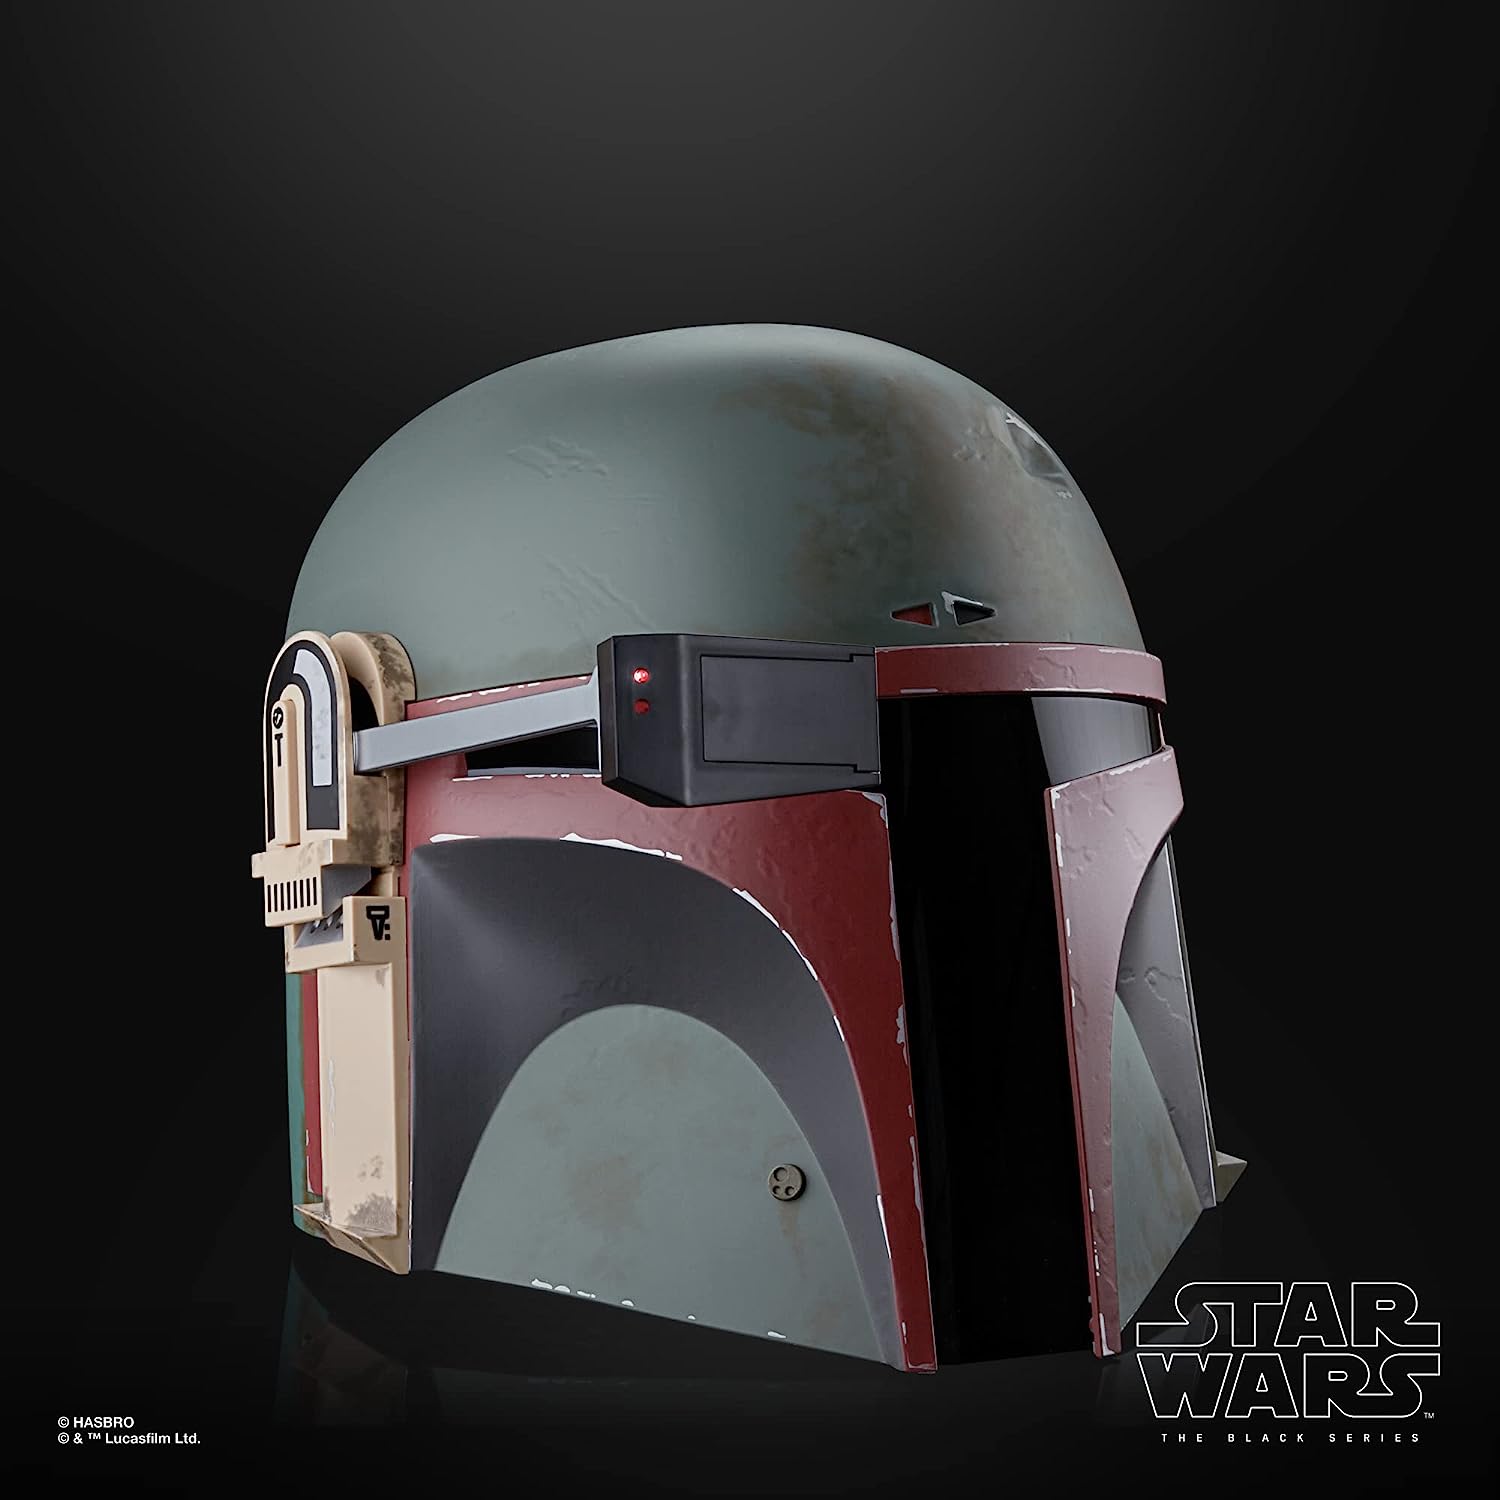 Star Wars The Black Series Boba Fett (Re-Armored) Premium Electronic Helmet Prop Replica - Hyperdrive Collector Zone